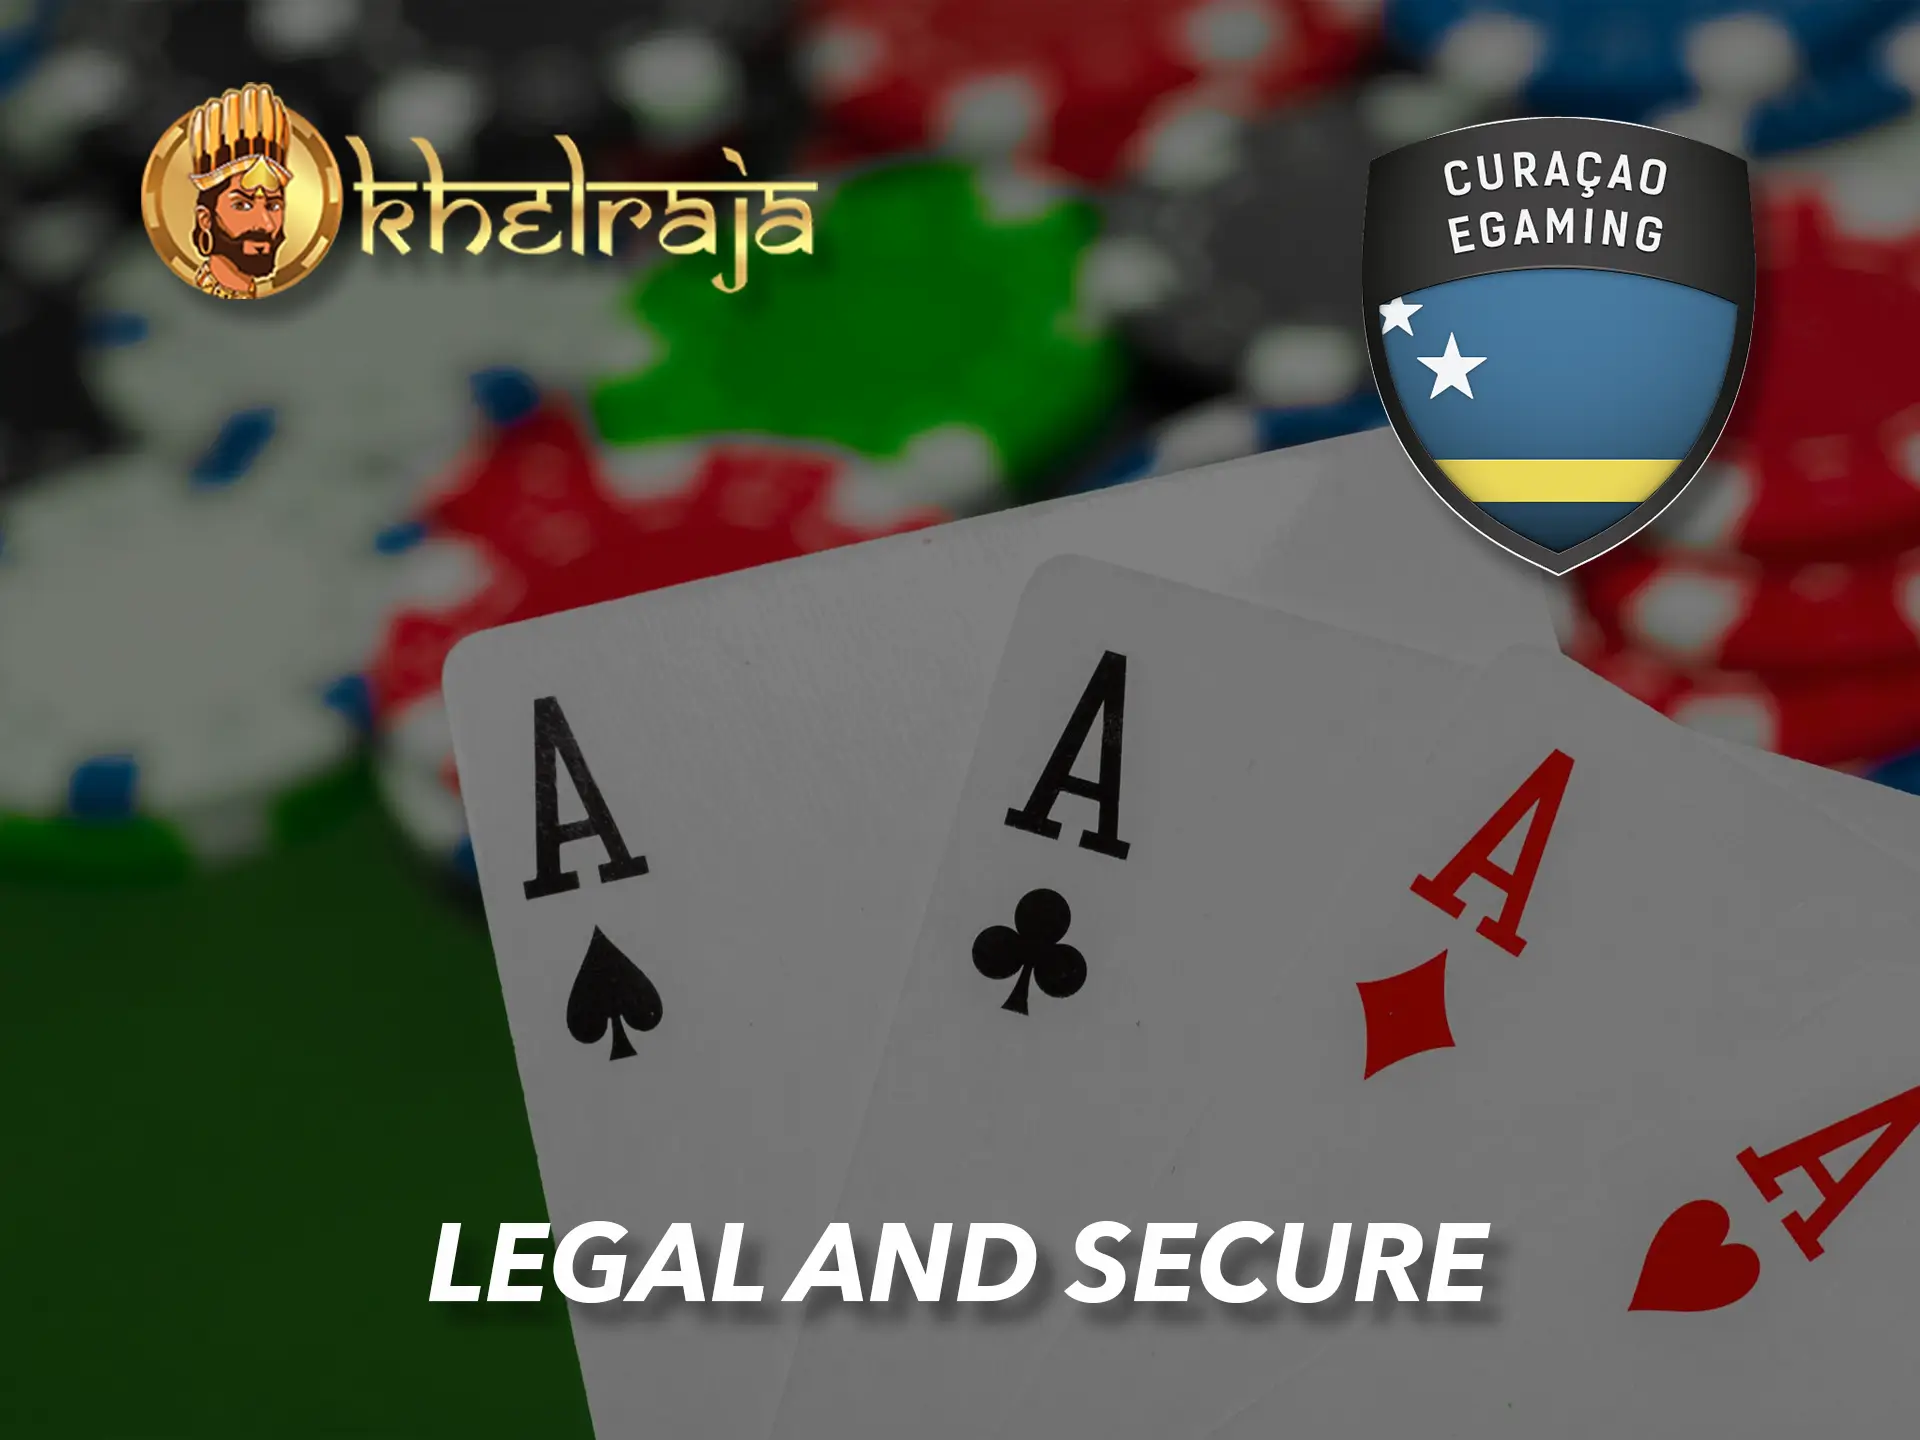 Khelraja is a verified casino and holds a licence for its operations.